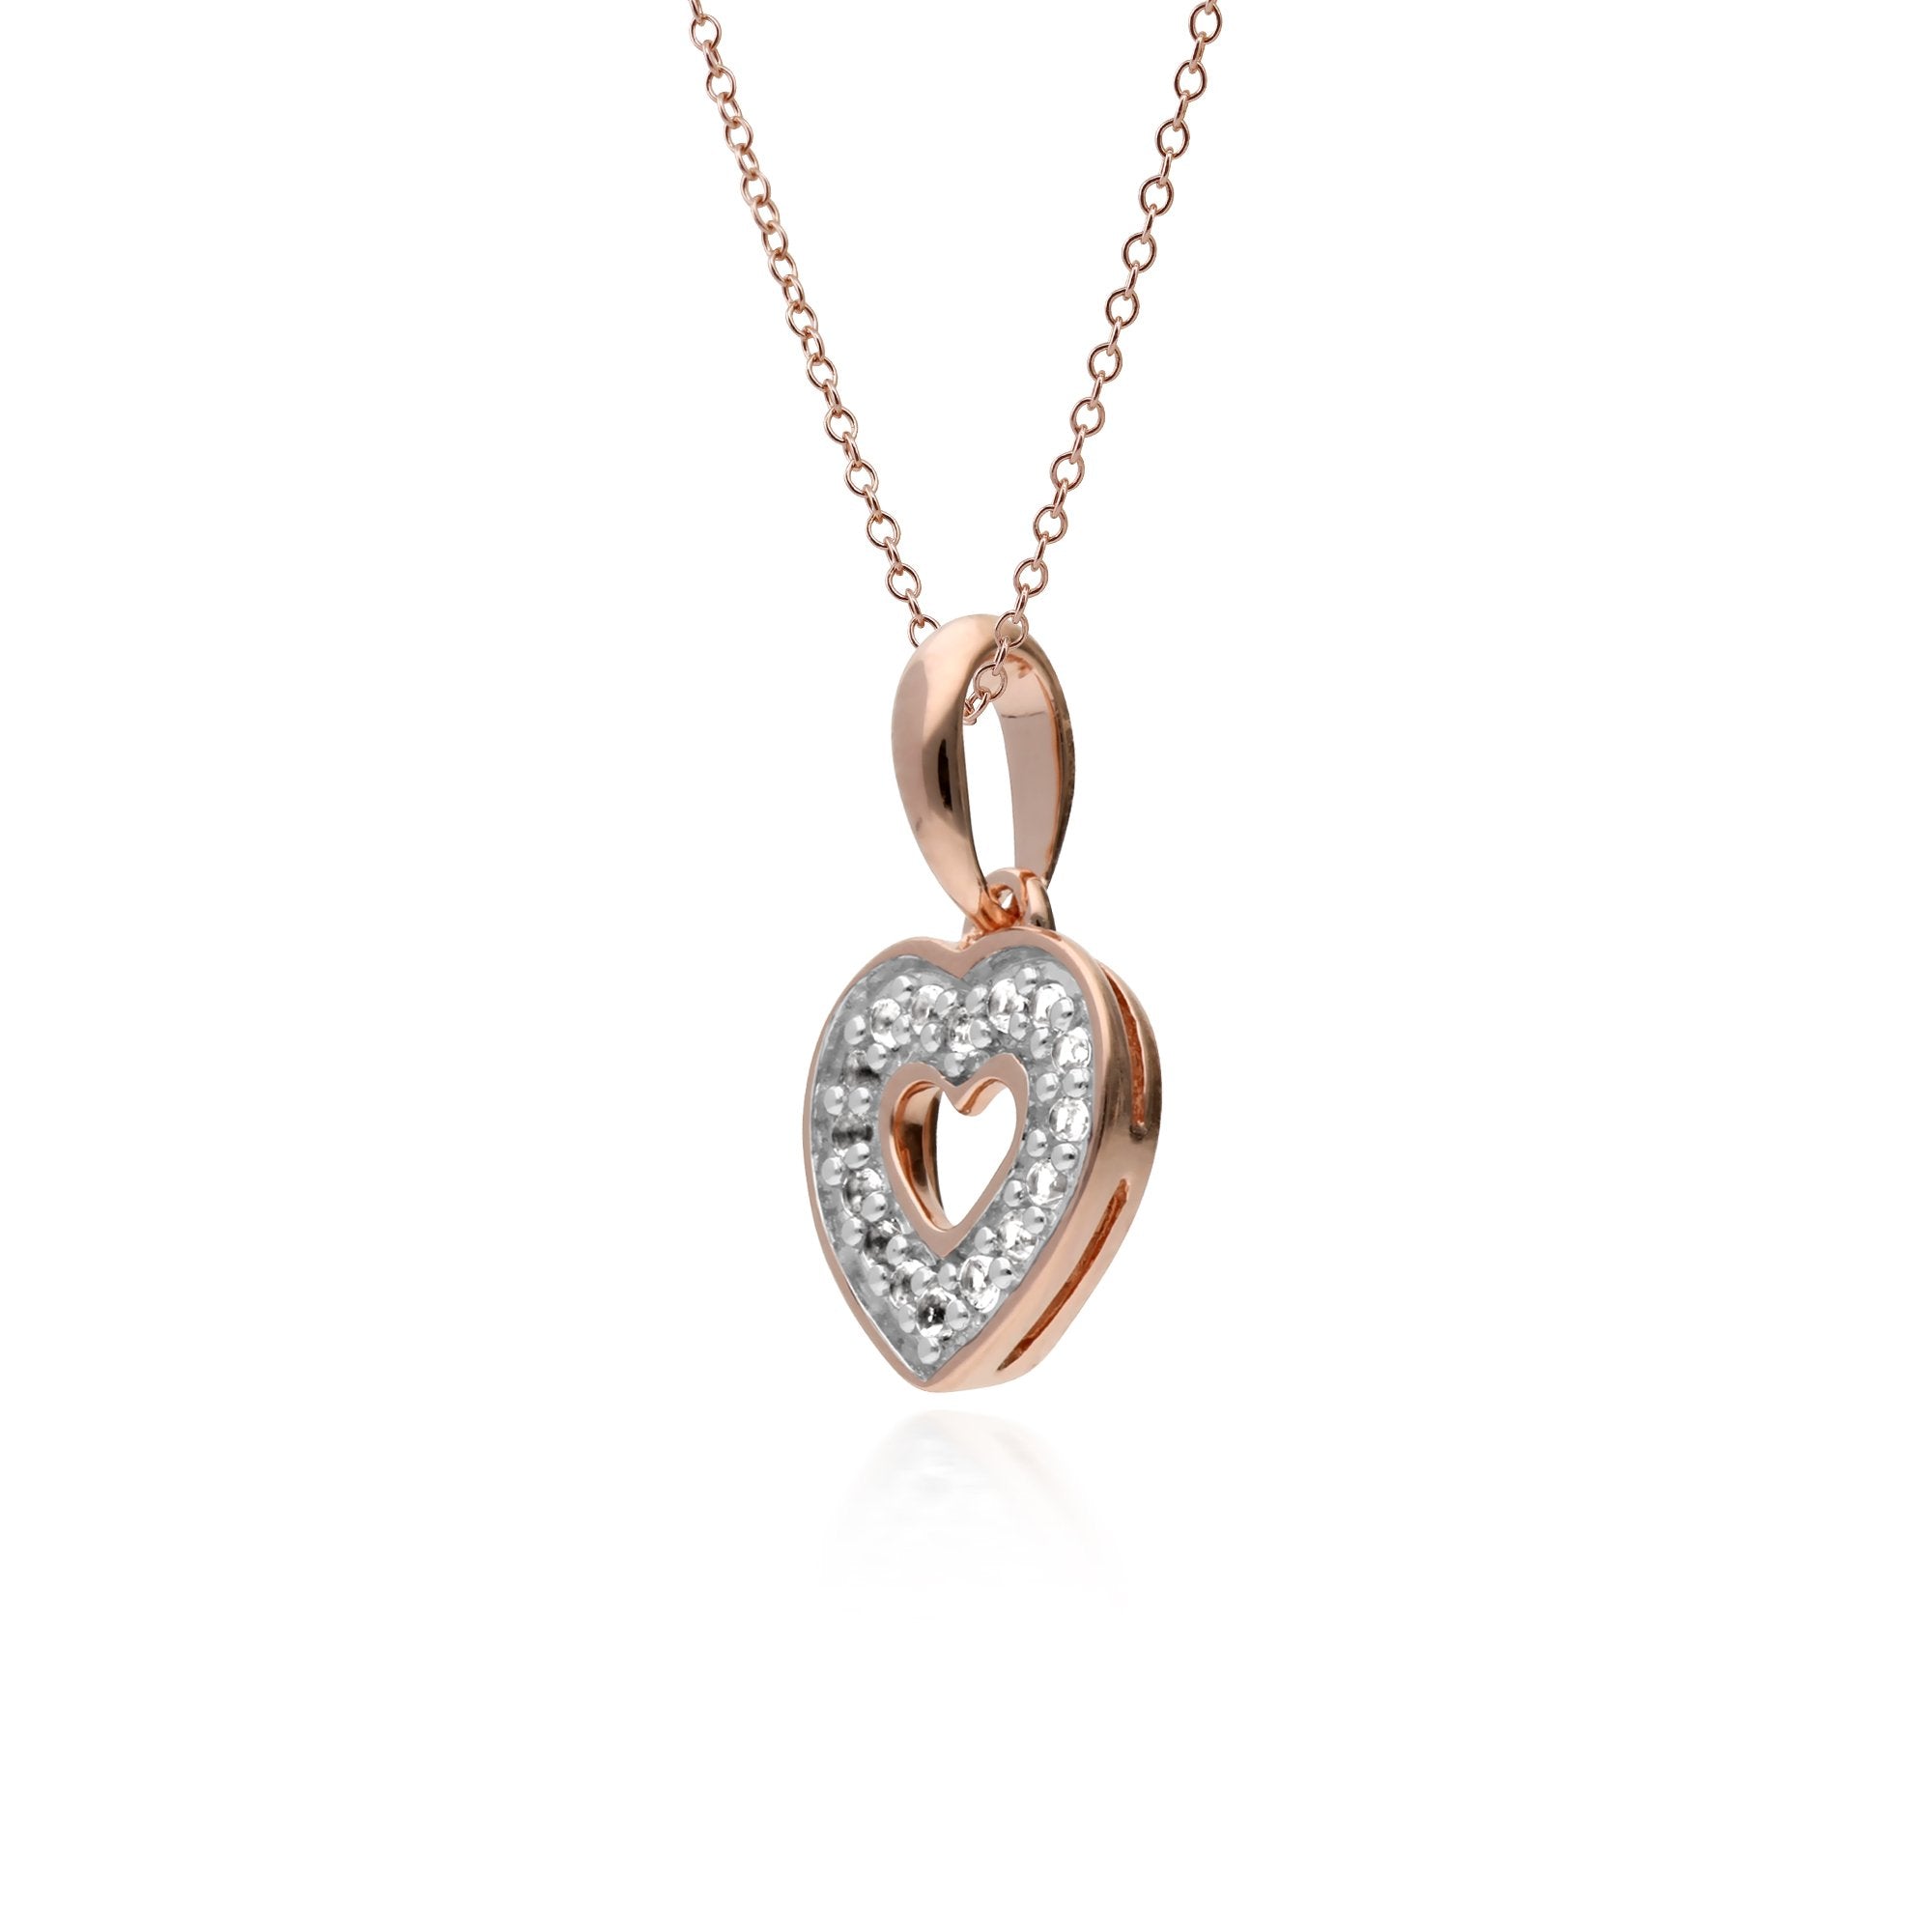 Gemondo Rose Gold Plated Sterling Silver Topaz Heart Pendant with 45cm Chain